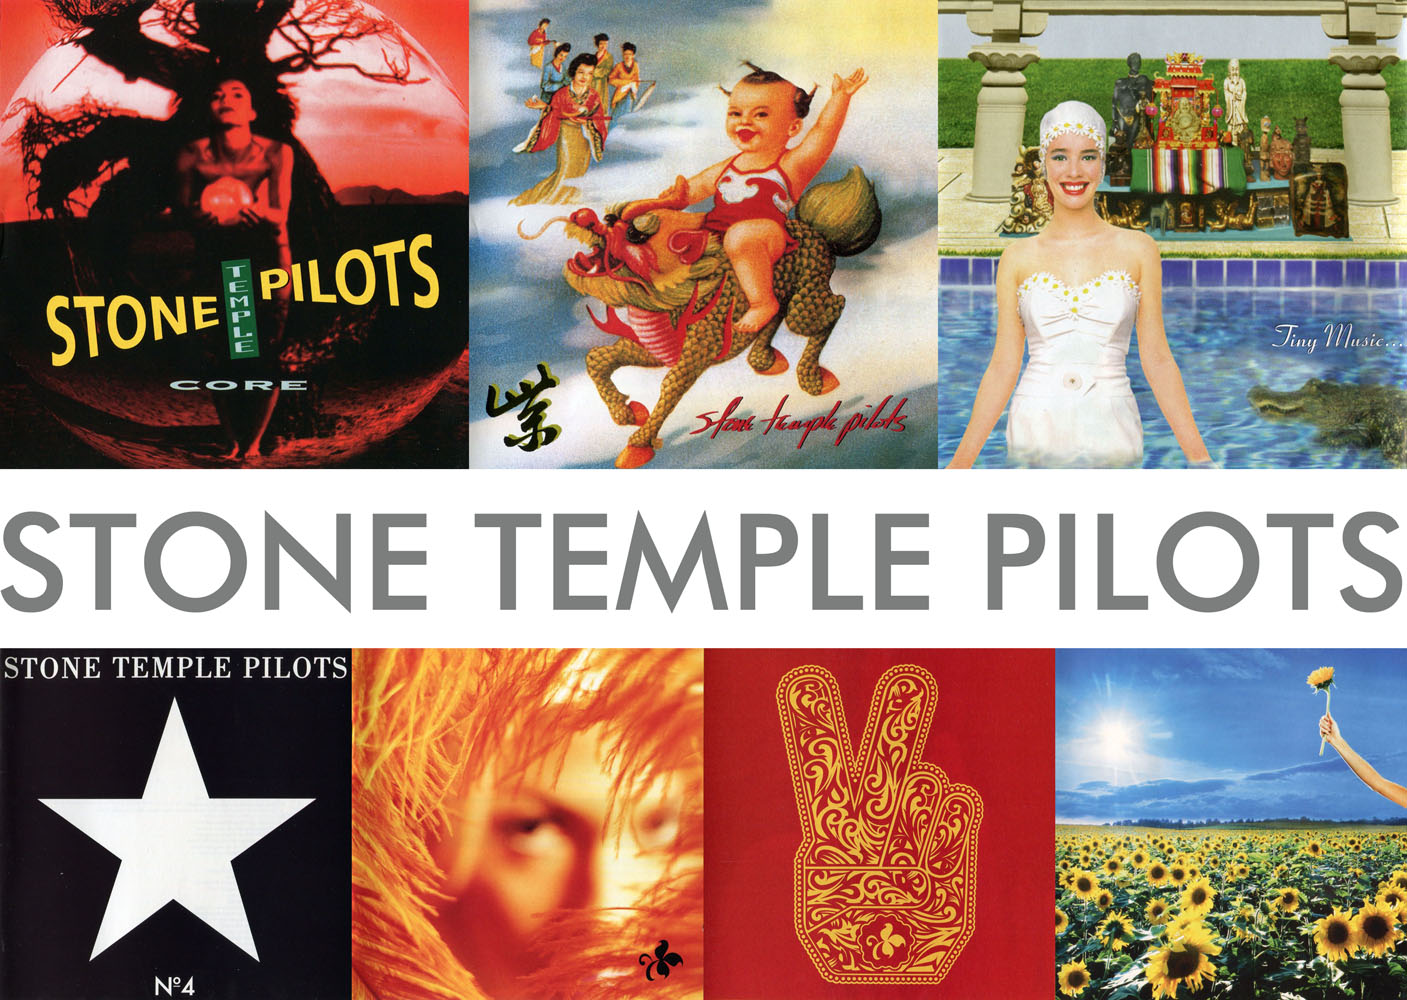 how many albums has stone temple pilots sold